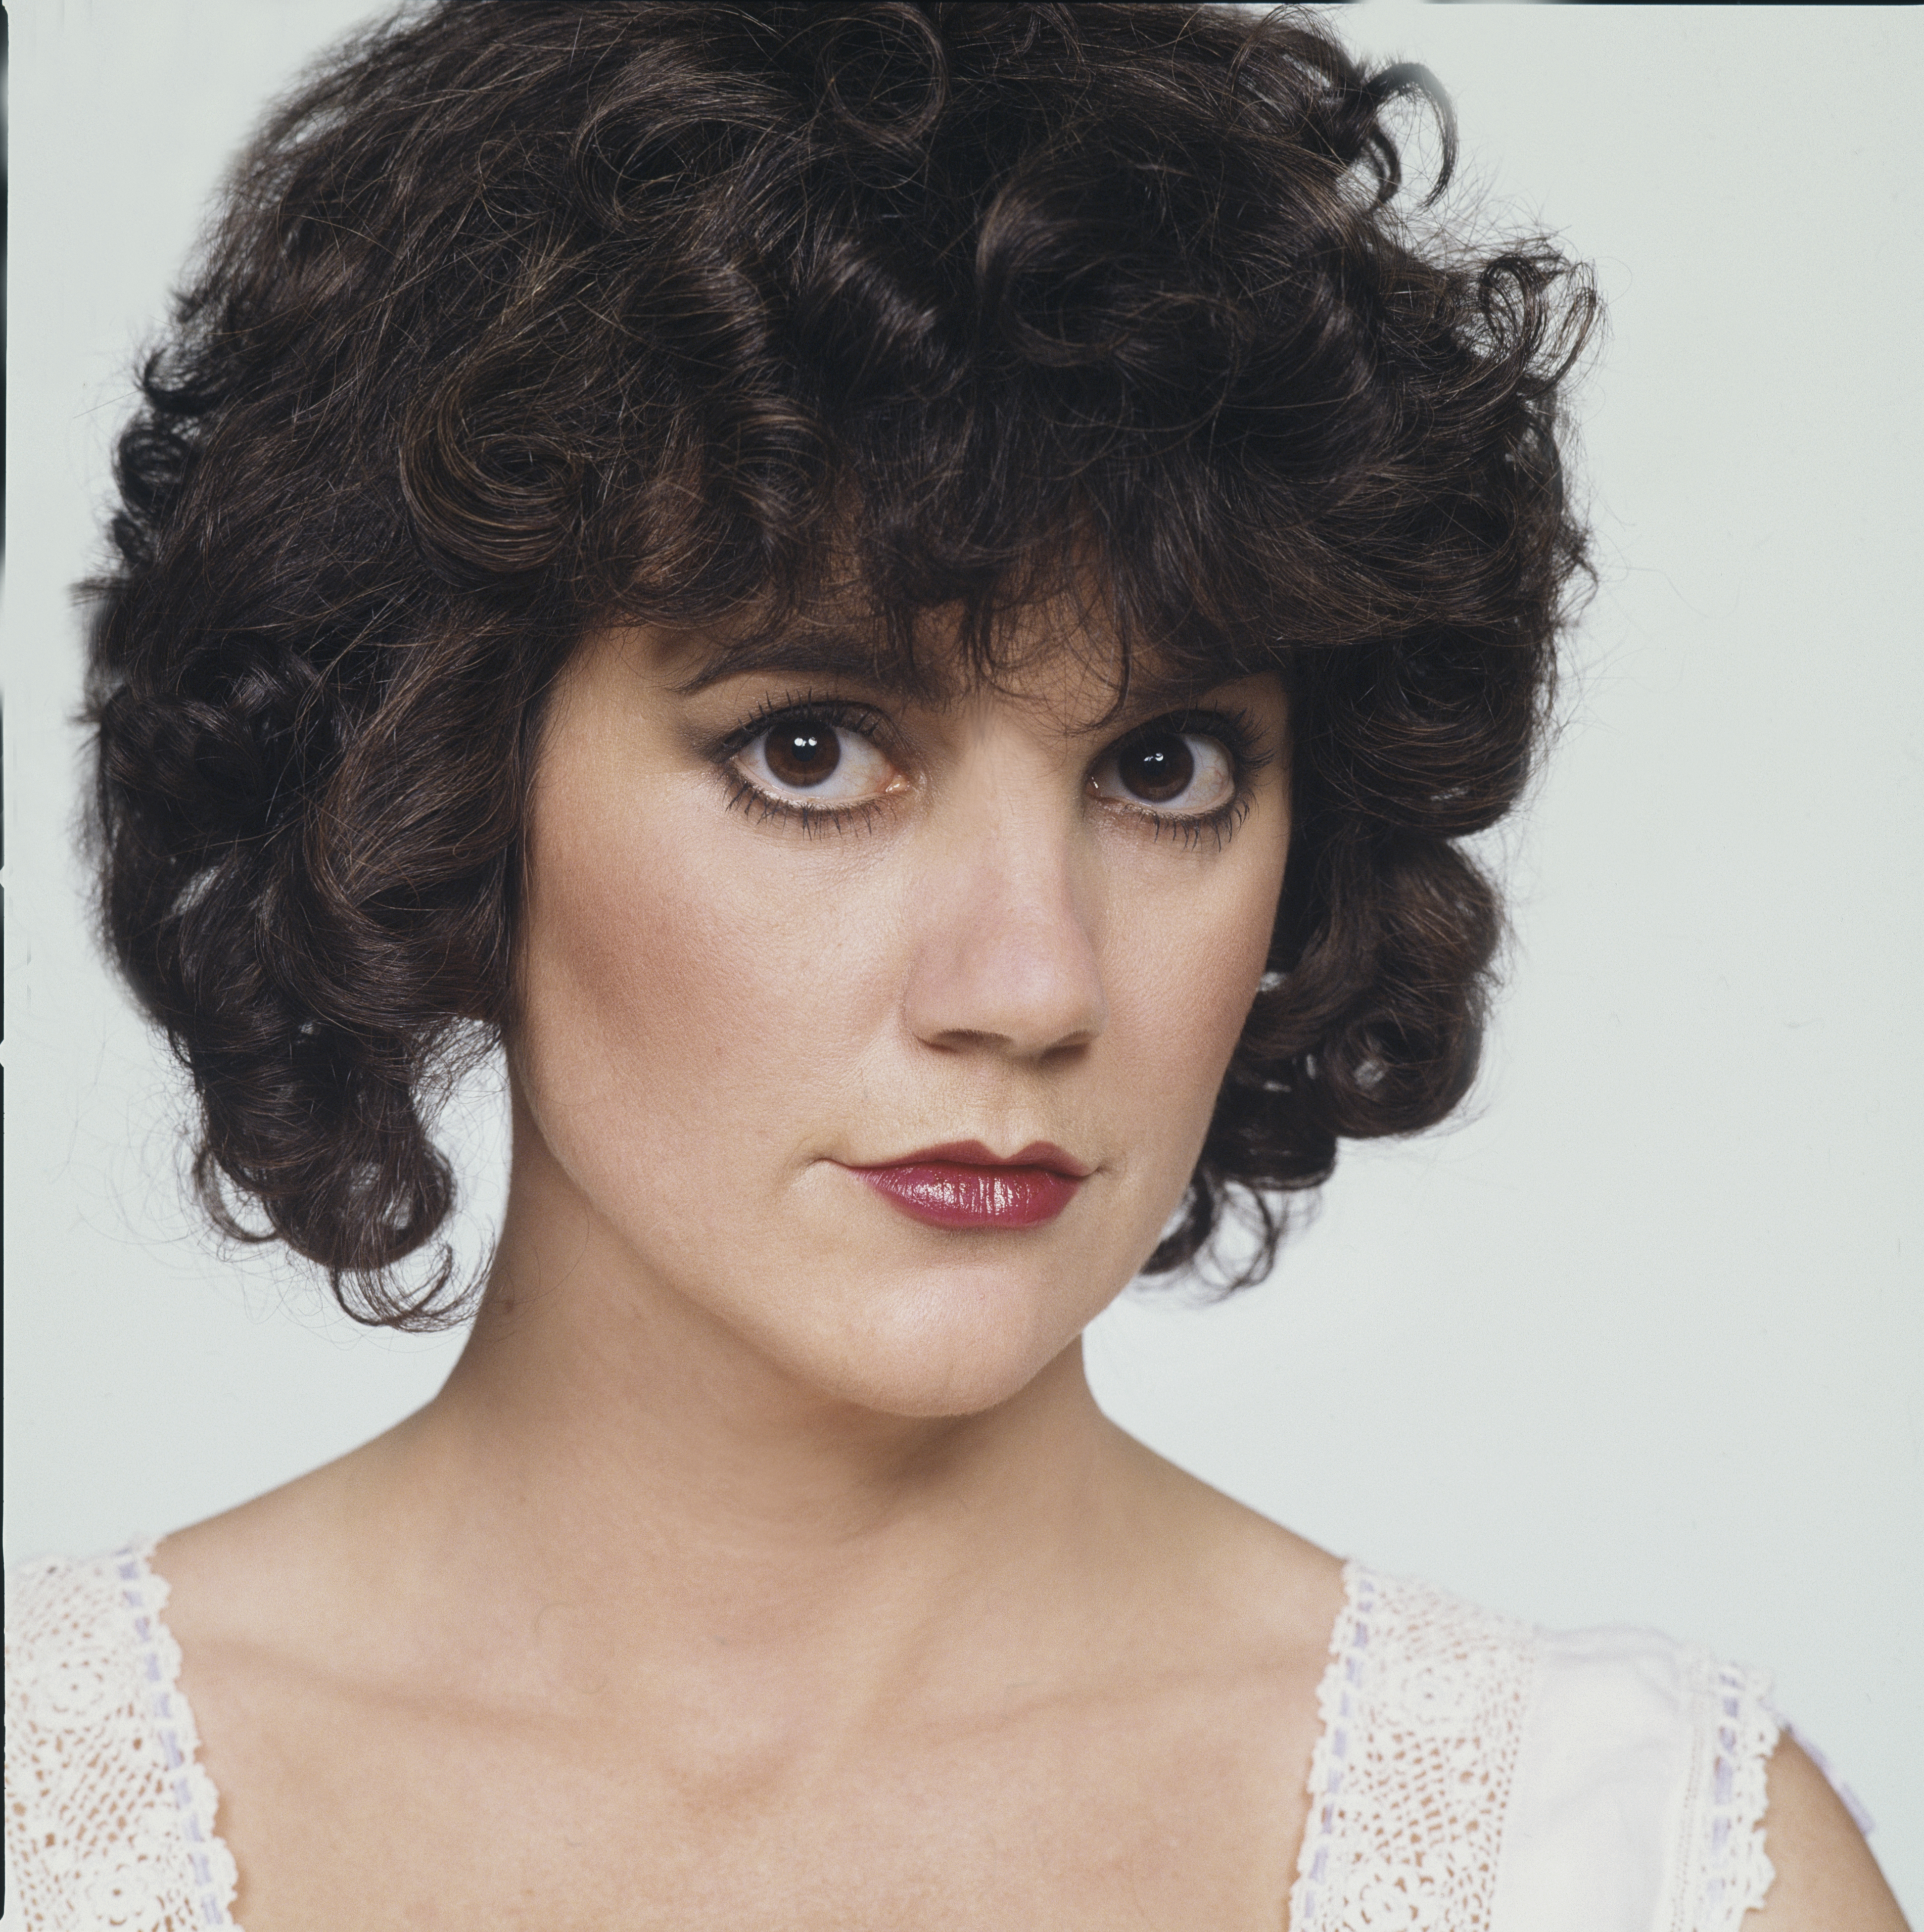 Linda Ronstadt poses during a portrait session in Los Angeles, California, circa 1982 | Source: Getty Images